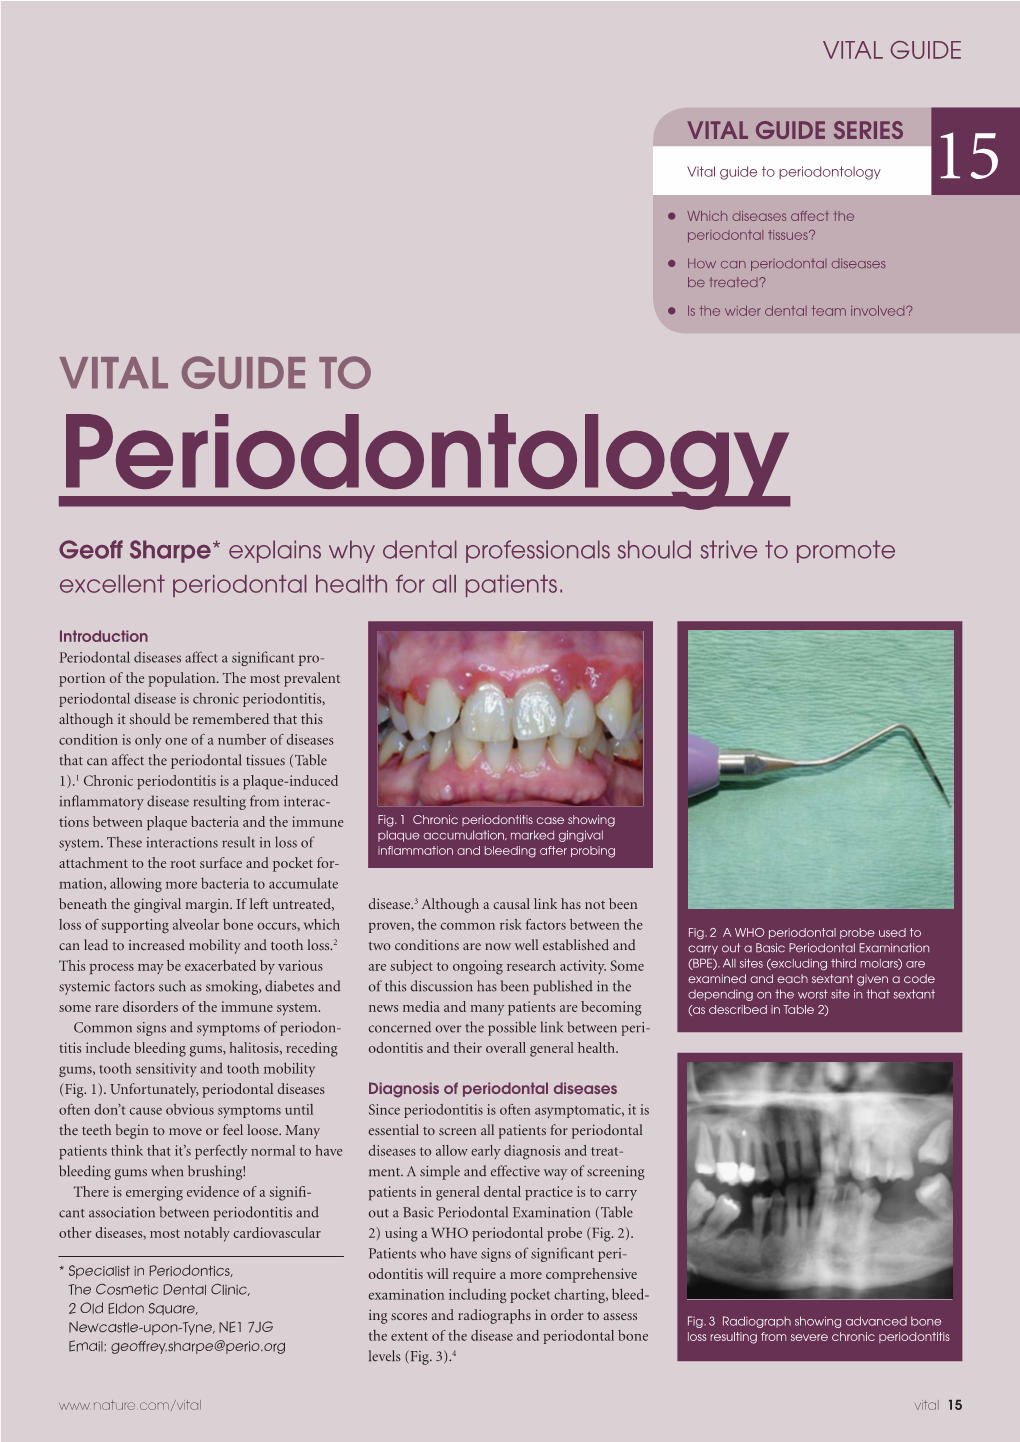 Vital Guide to Periodontology 15